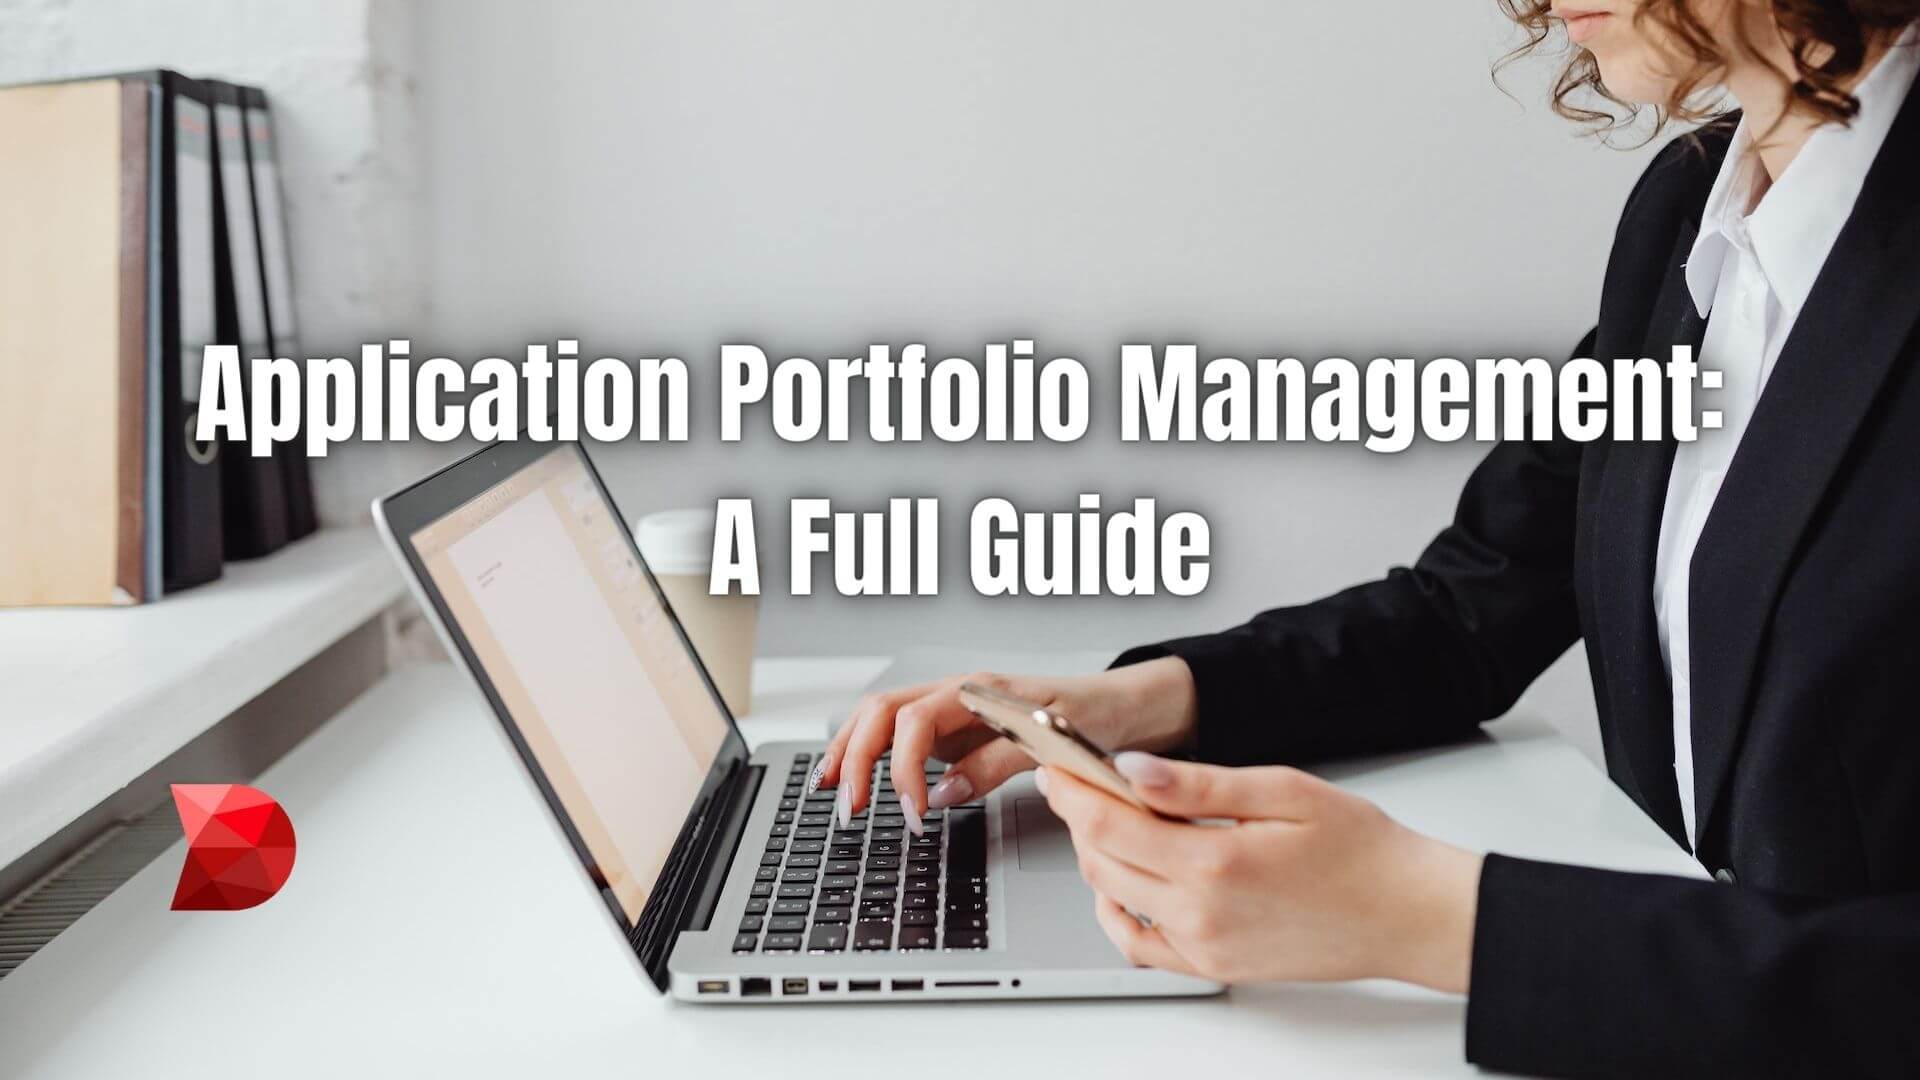 Application portfolio management is a business procedure that provides an organized strategy to manage all technological assets. Learn more!